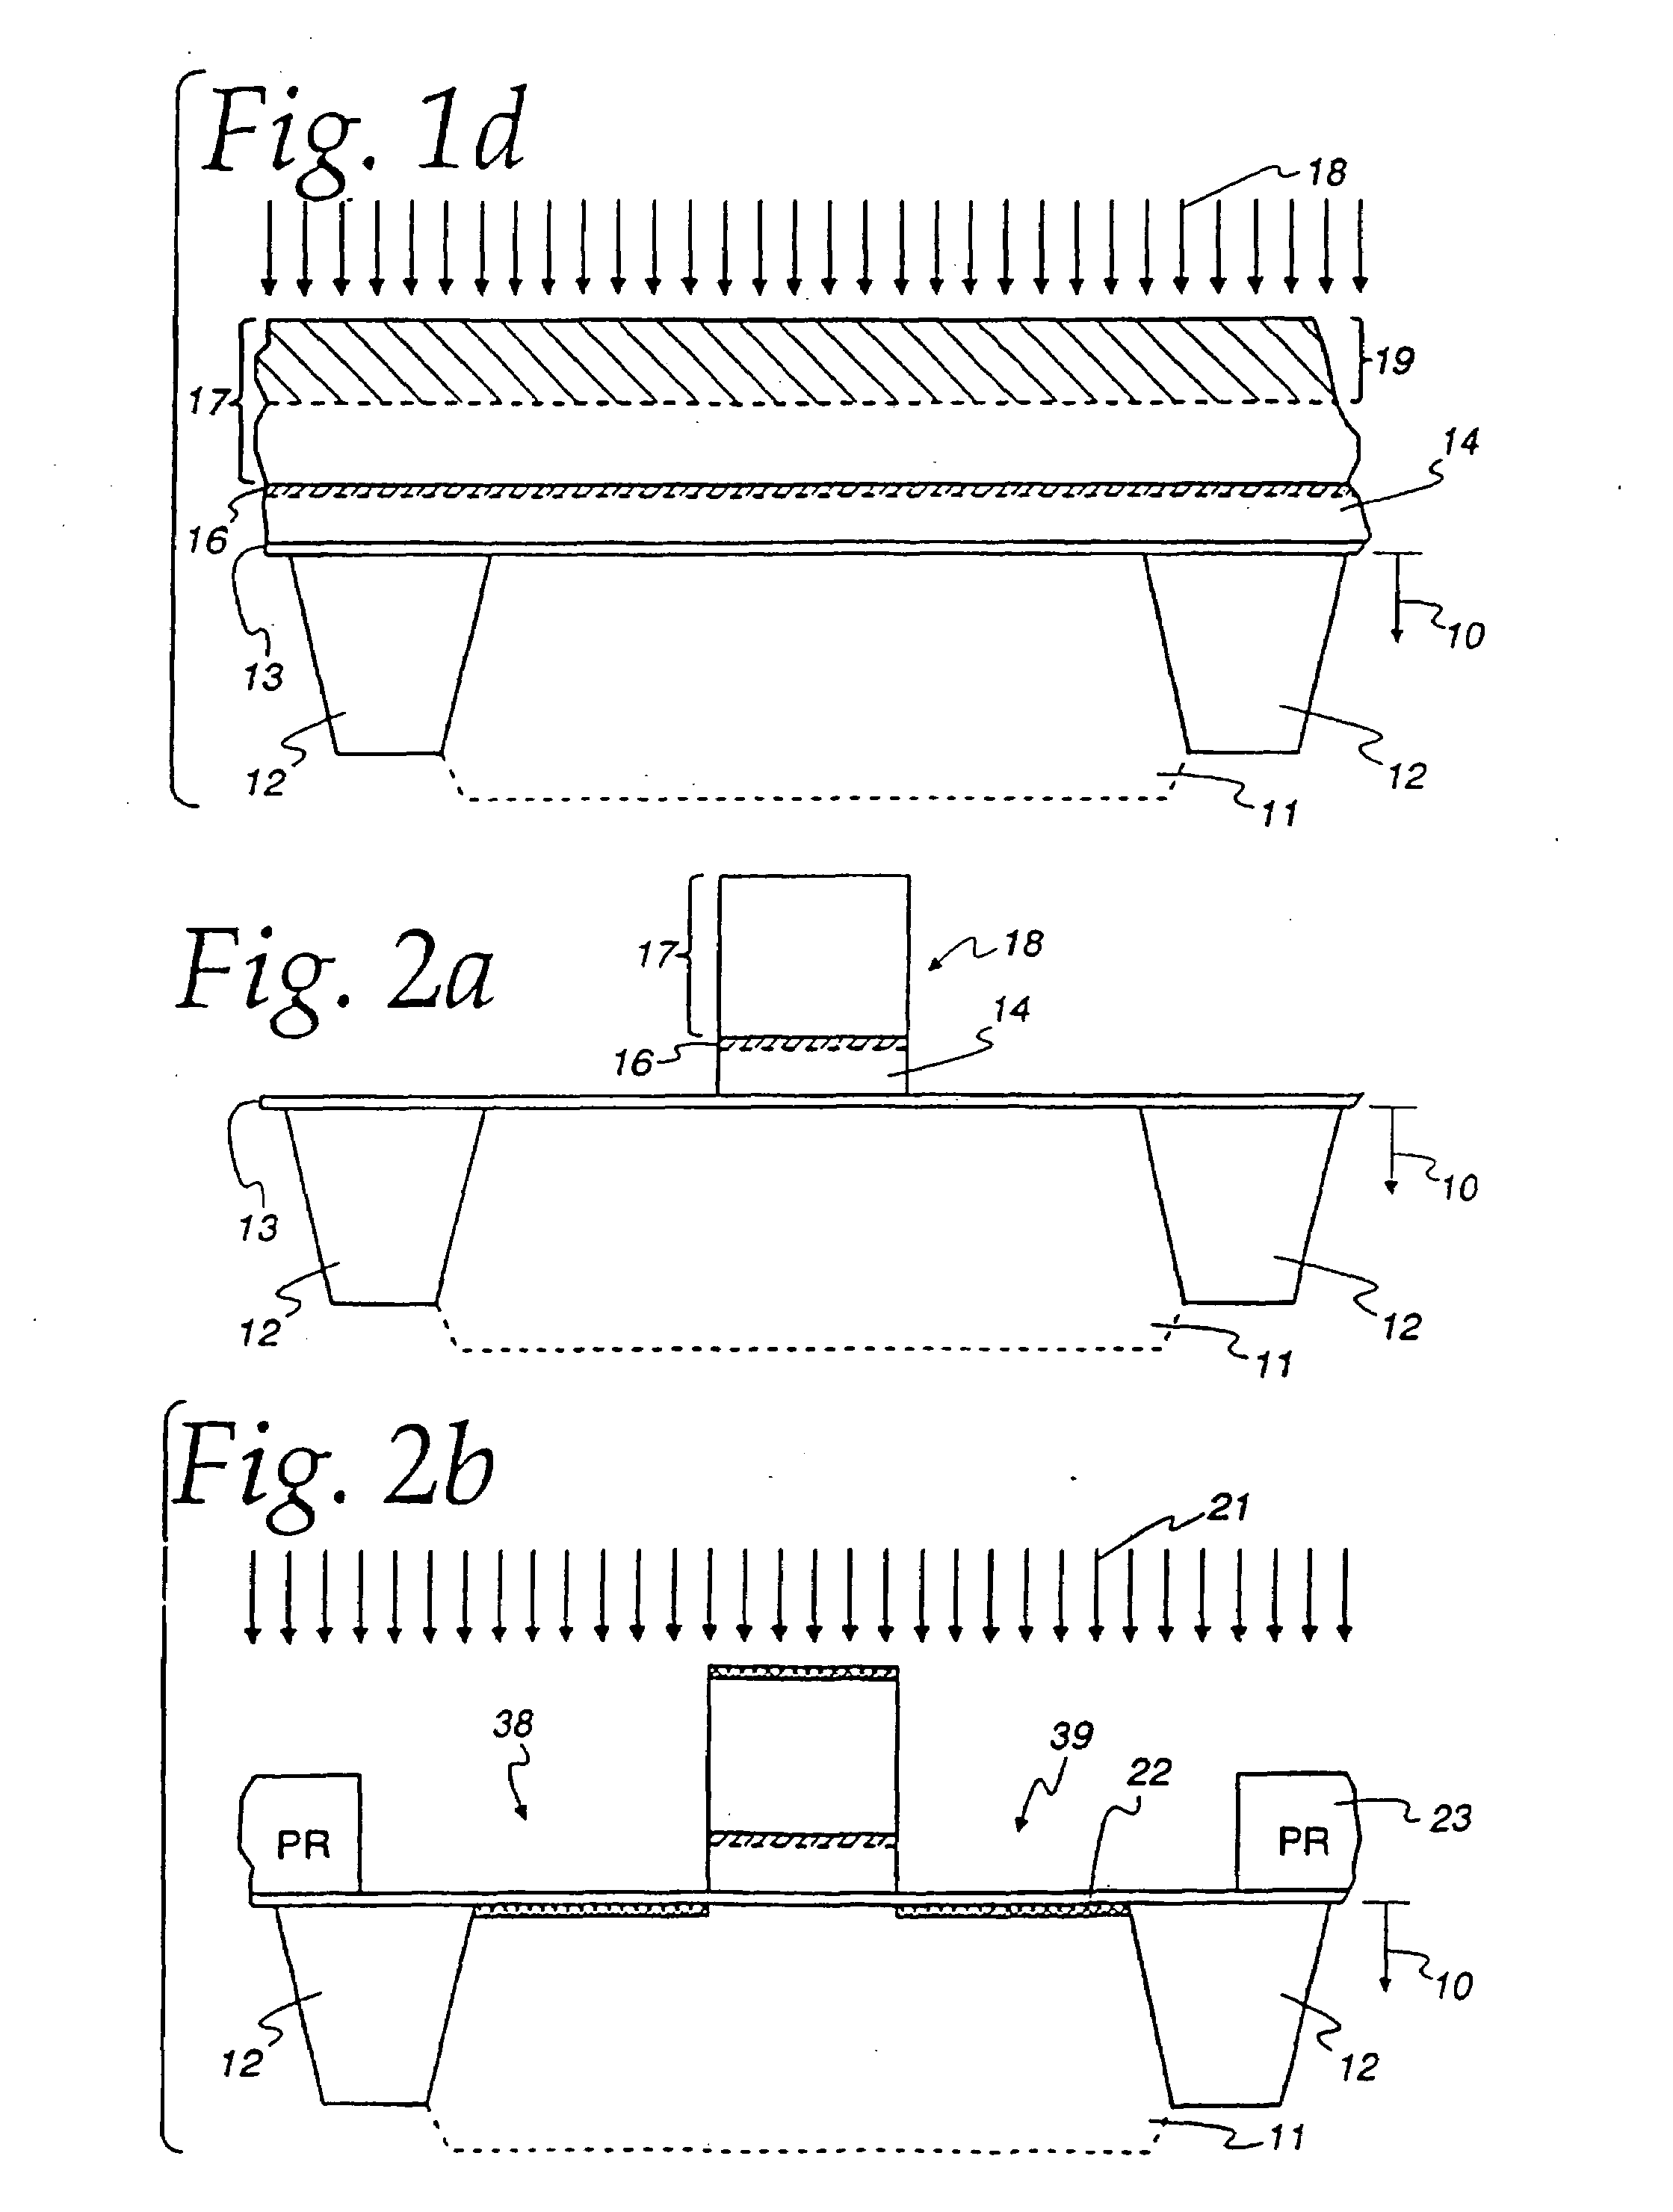 Semiconductor device and method of fabricating a semiconductor device